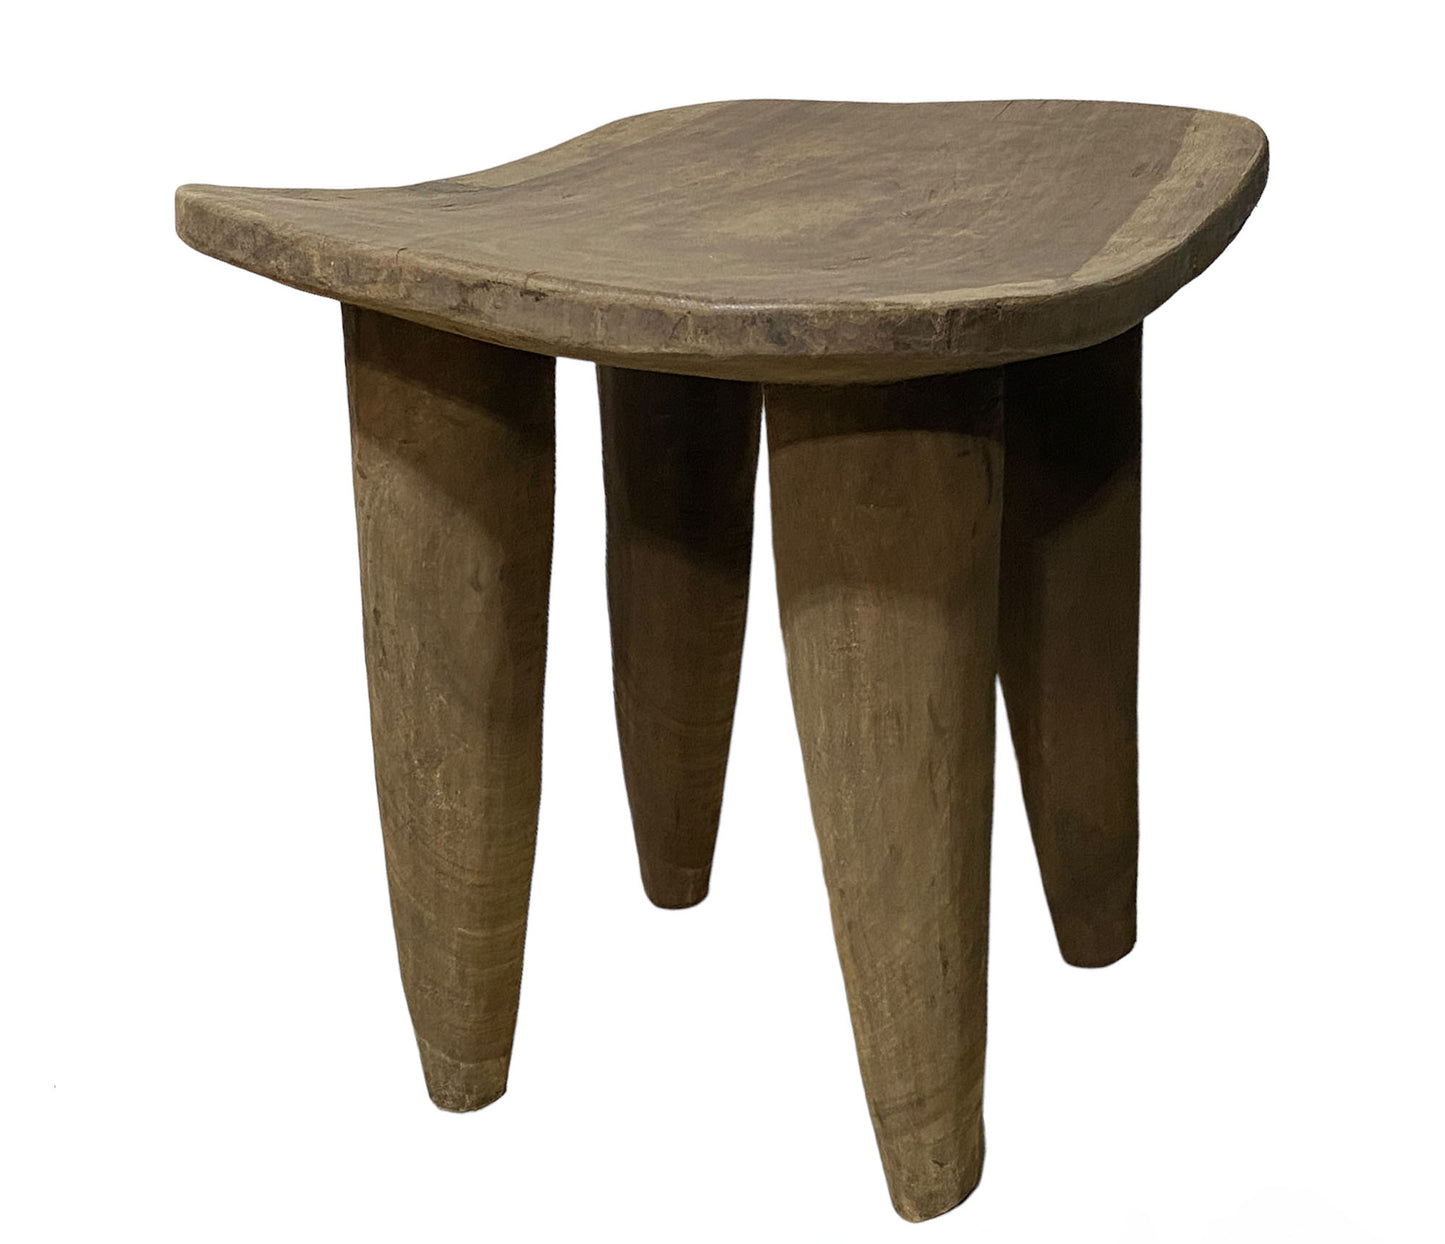 # 5528 Superb Rustic African Senufo Stool / Table  I coast 19.5" H by 20.5" w